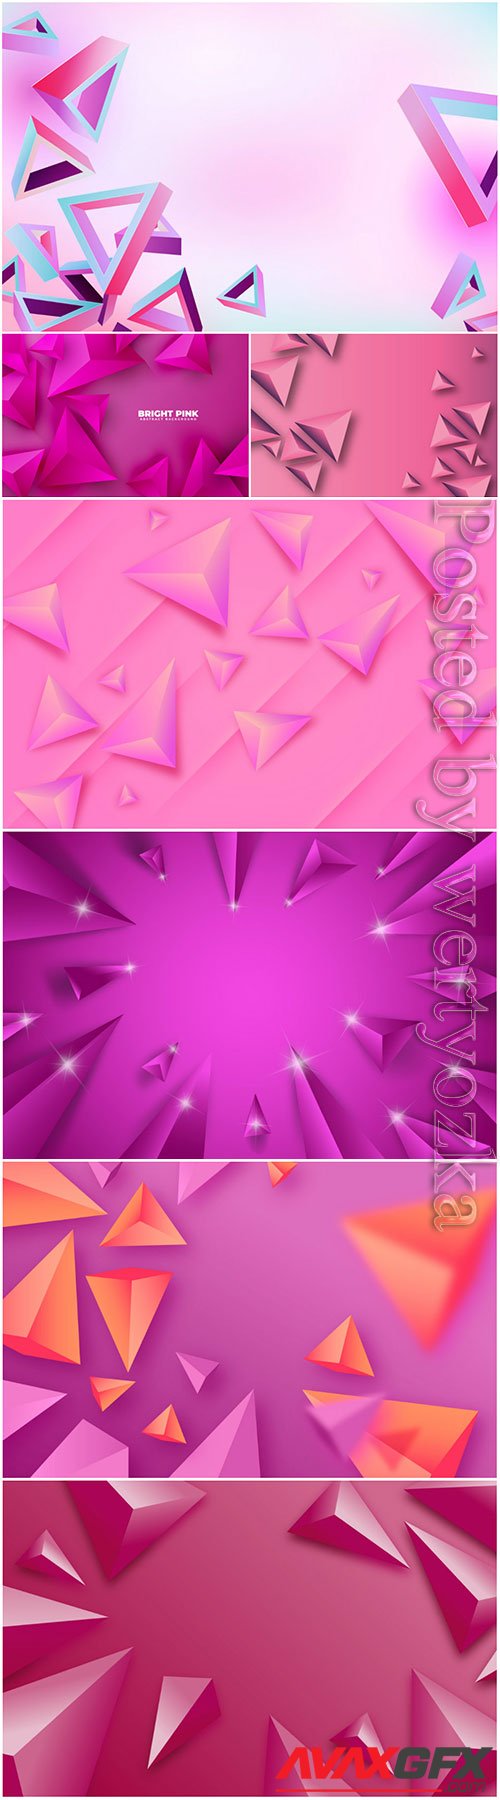 3d vector background with pink abstract elements